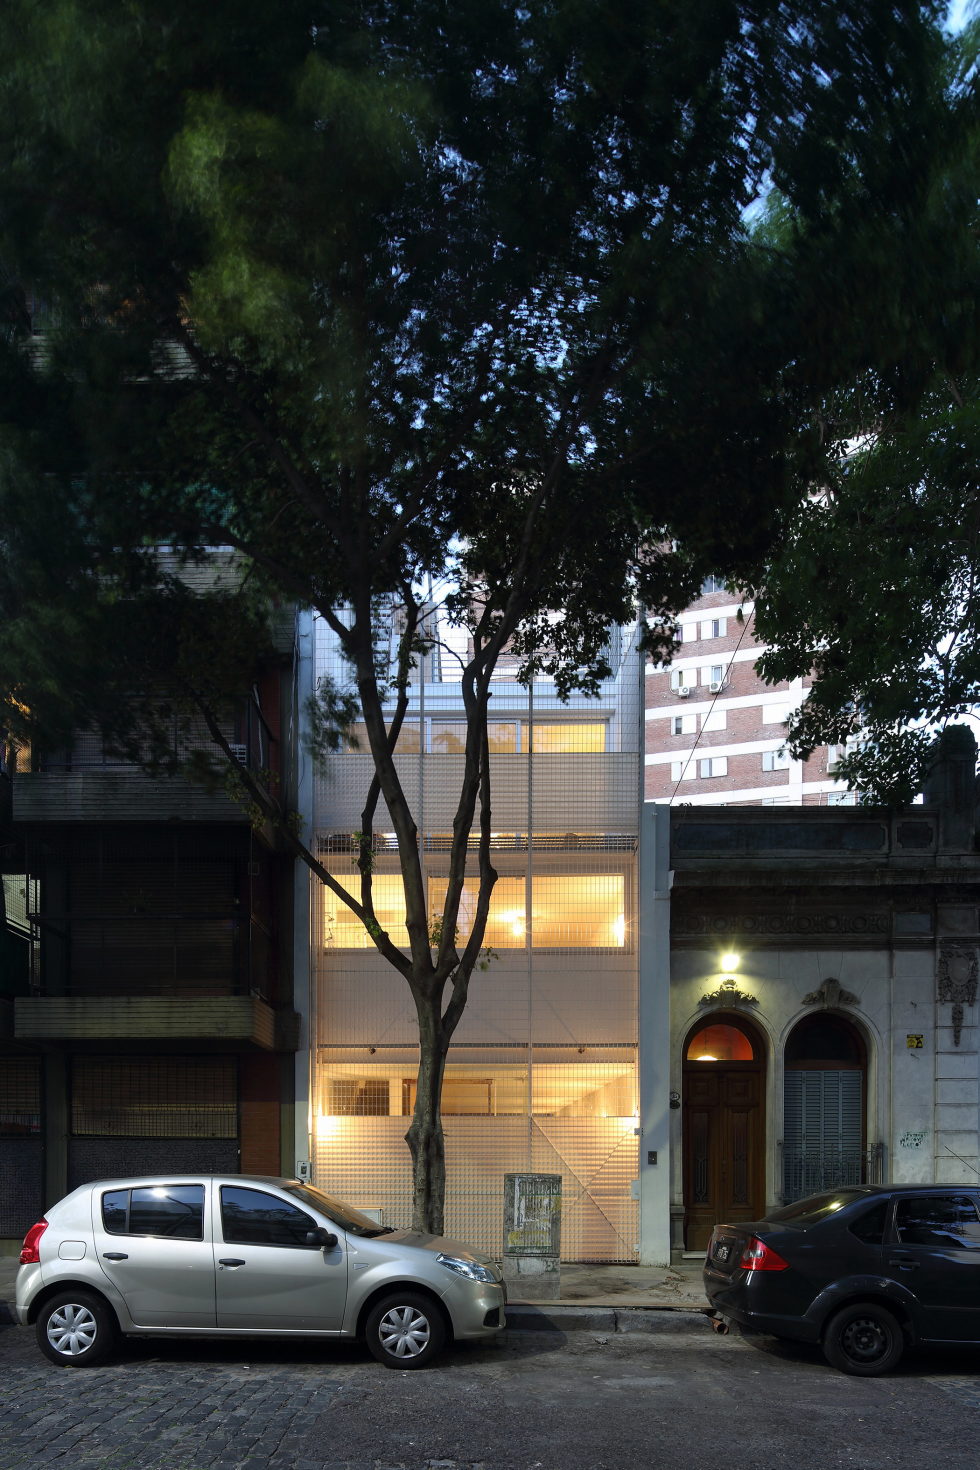 Jauretche House In Buenos Aires upon the project of Colle-Croce 15